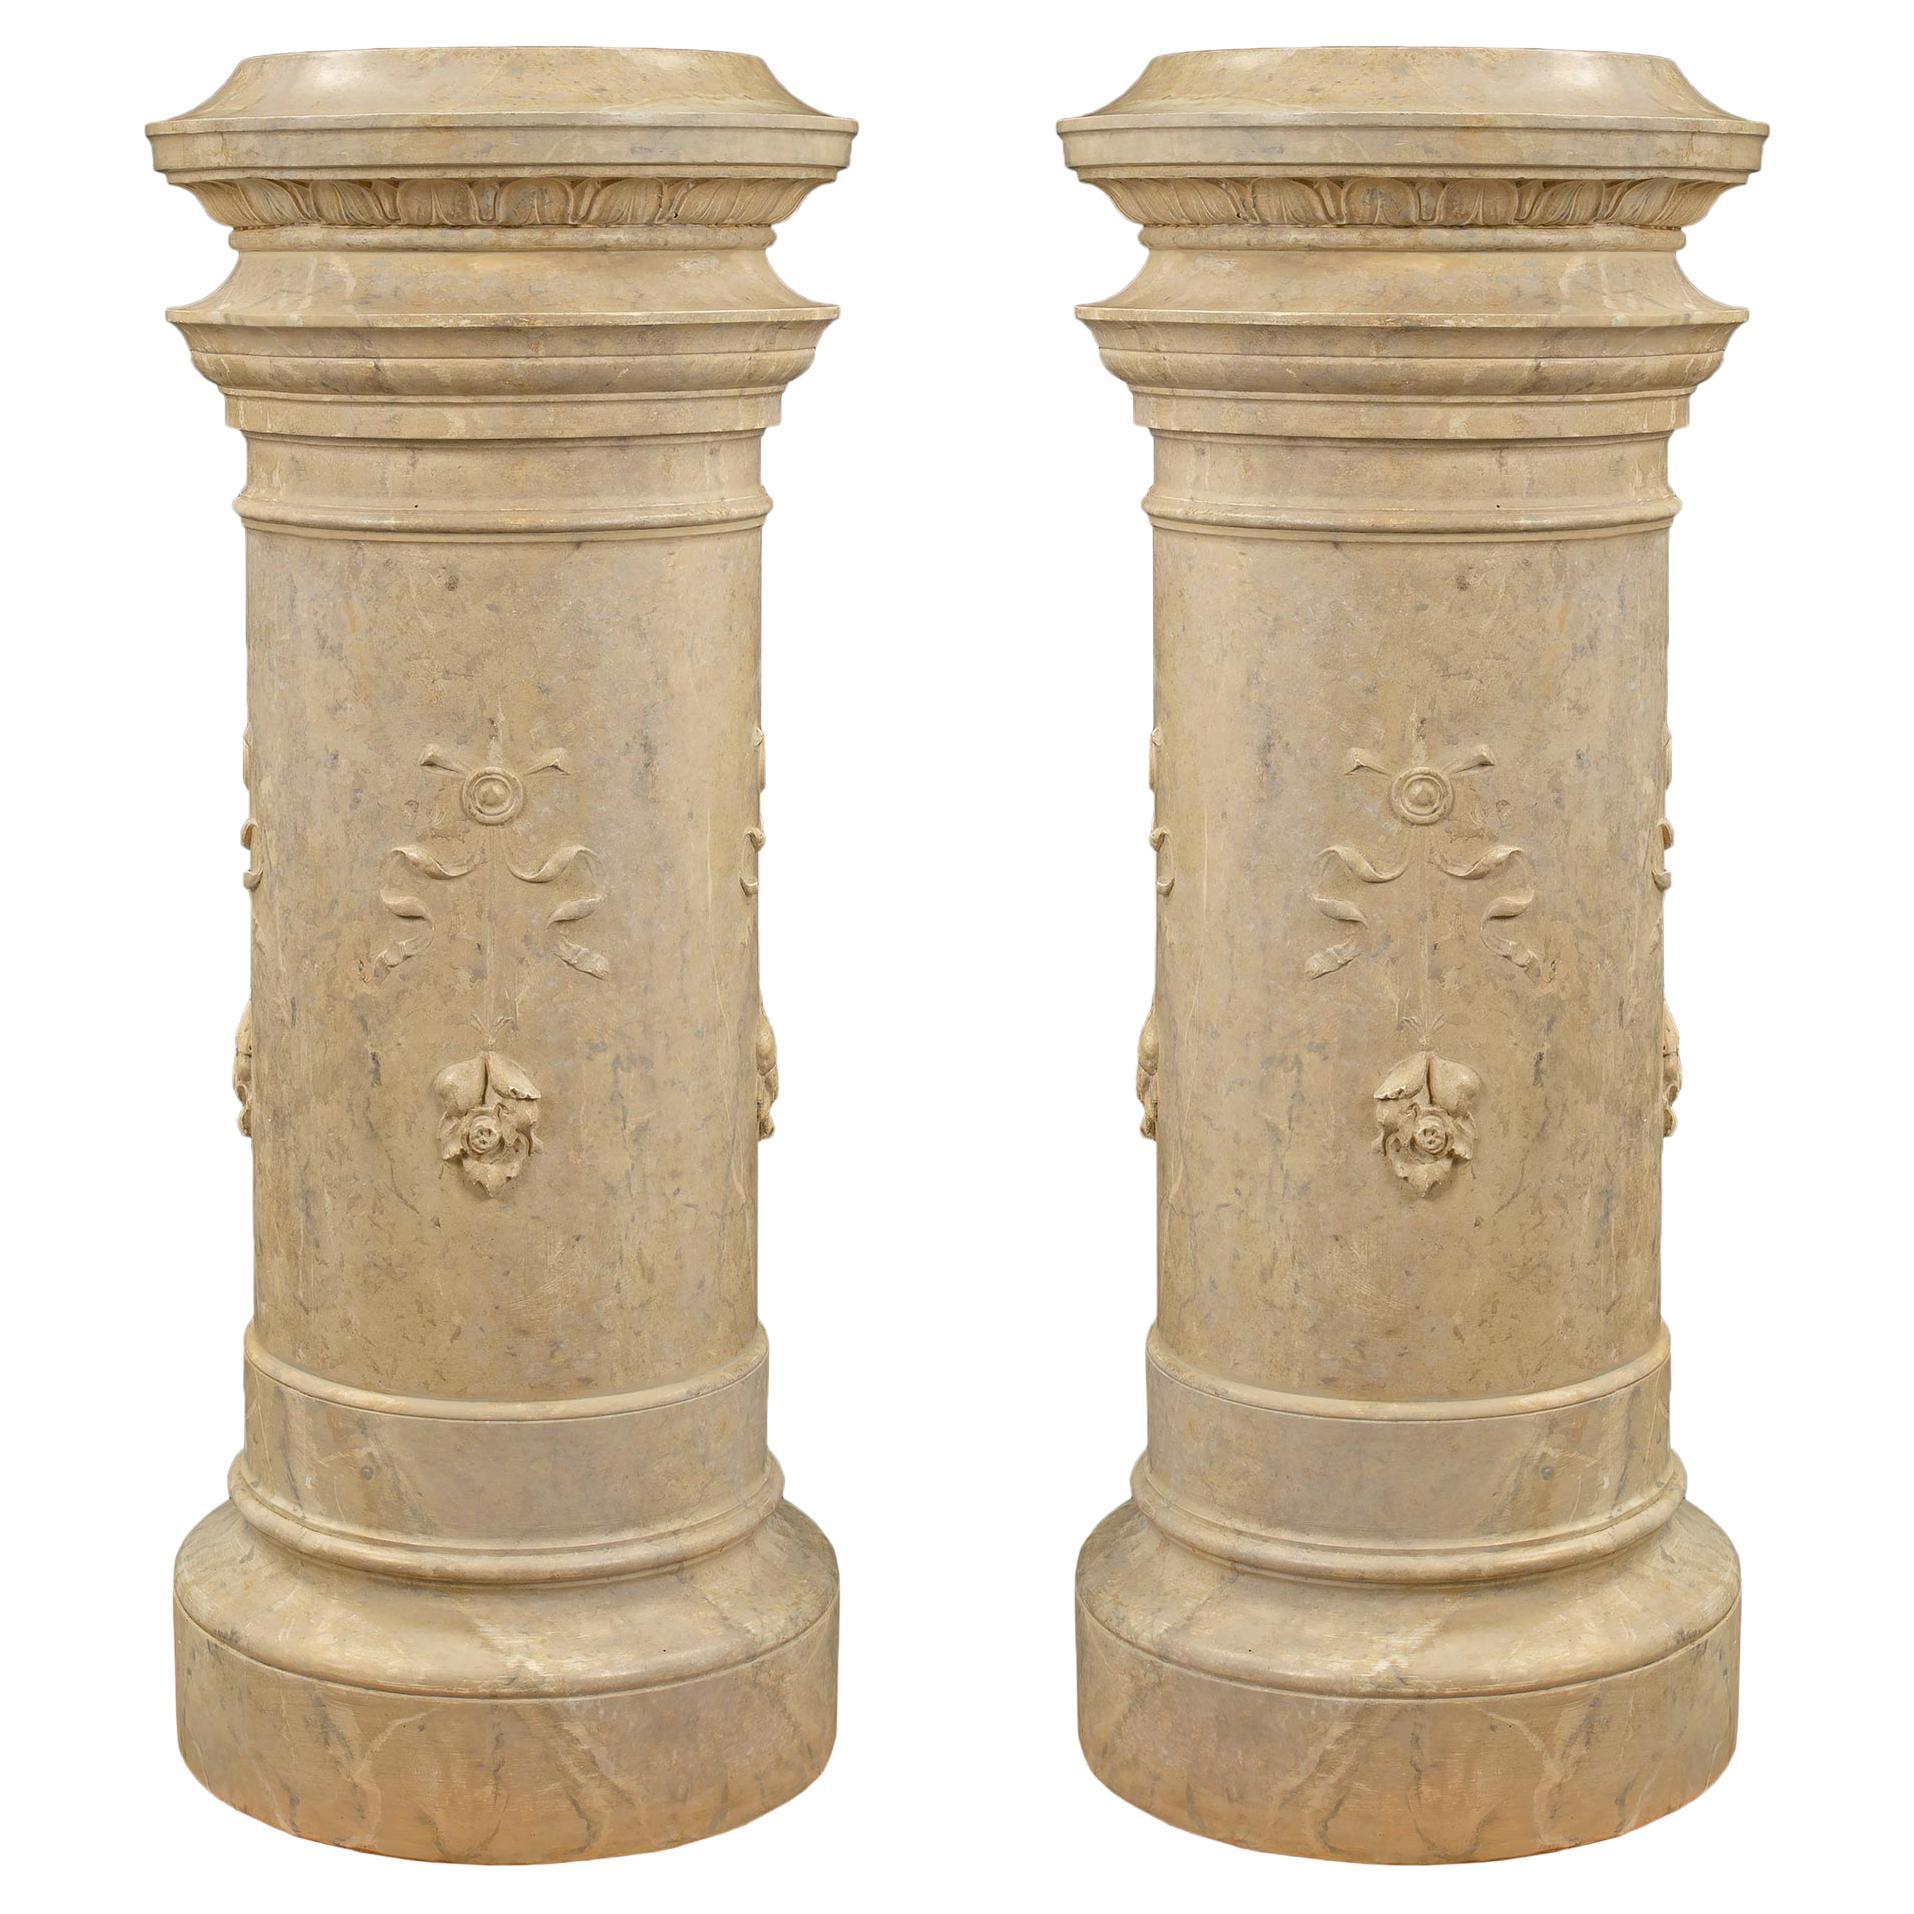  French 19th Century Louis XVI Style Plaster Columns with a Faux Marble Finish For Sale